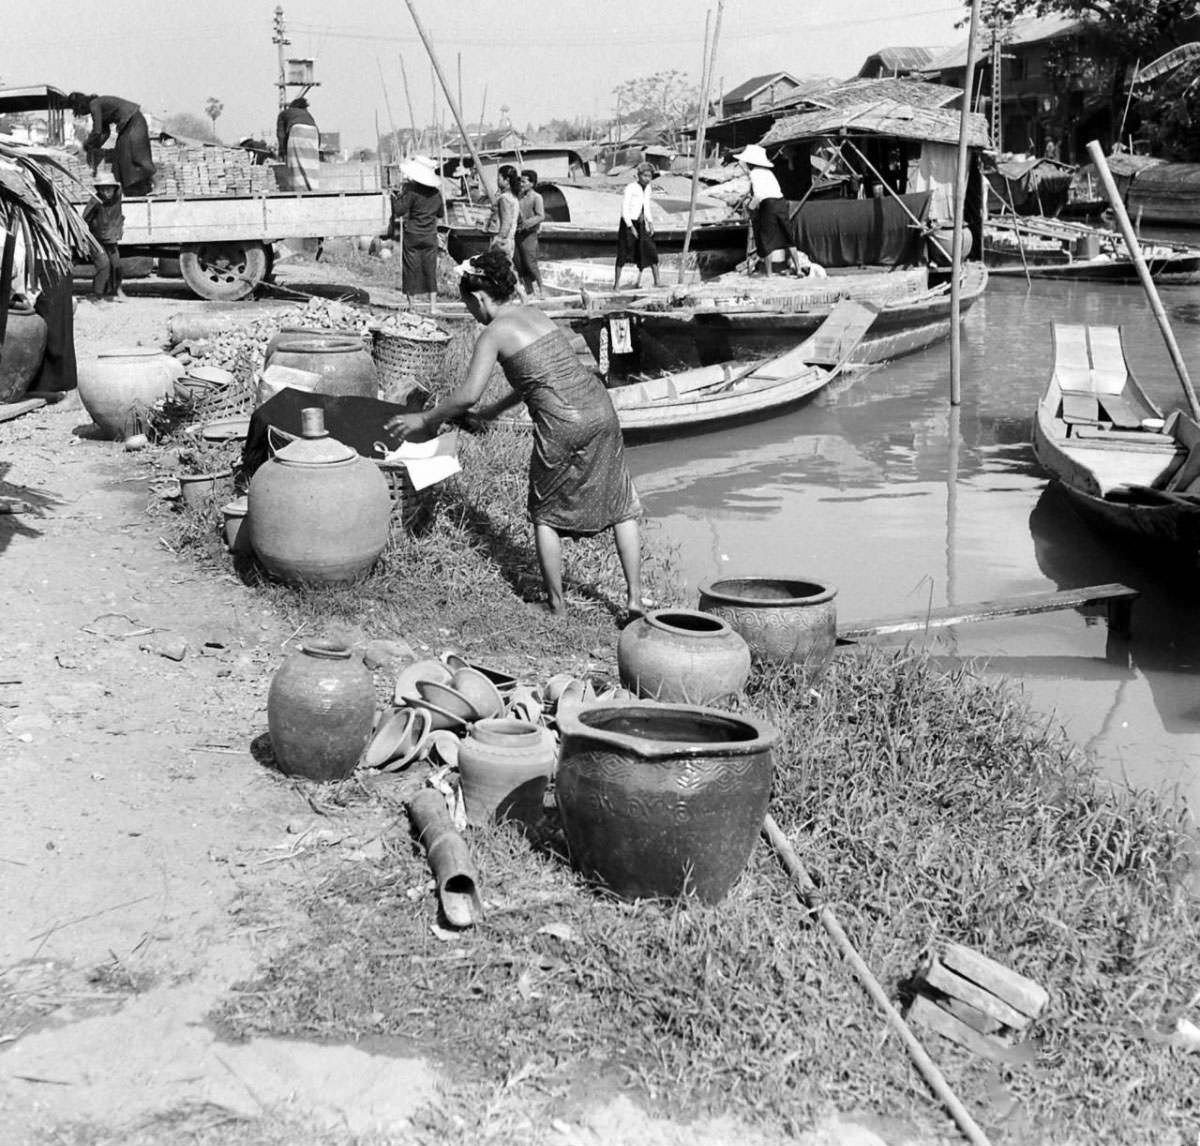 What Bangkok, Thailand looked like in the 1950s Through These Fascinating Vintage Photos